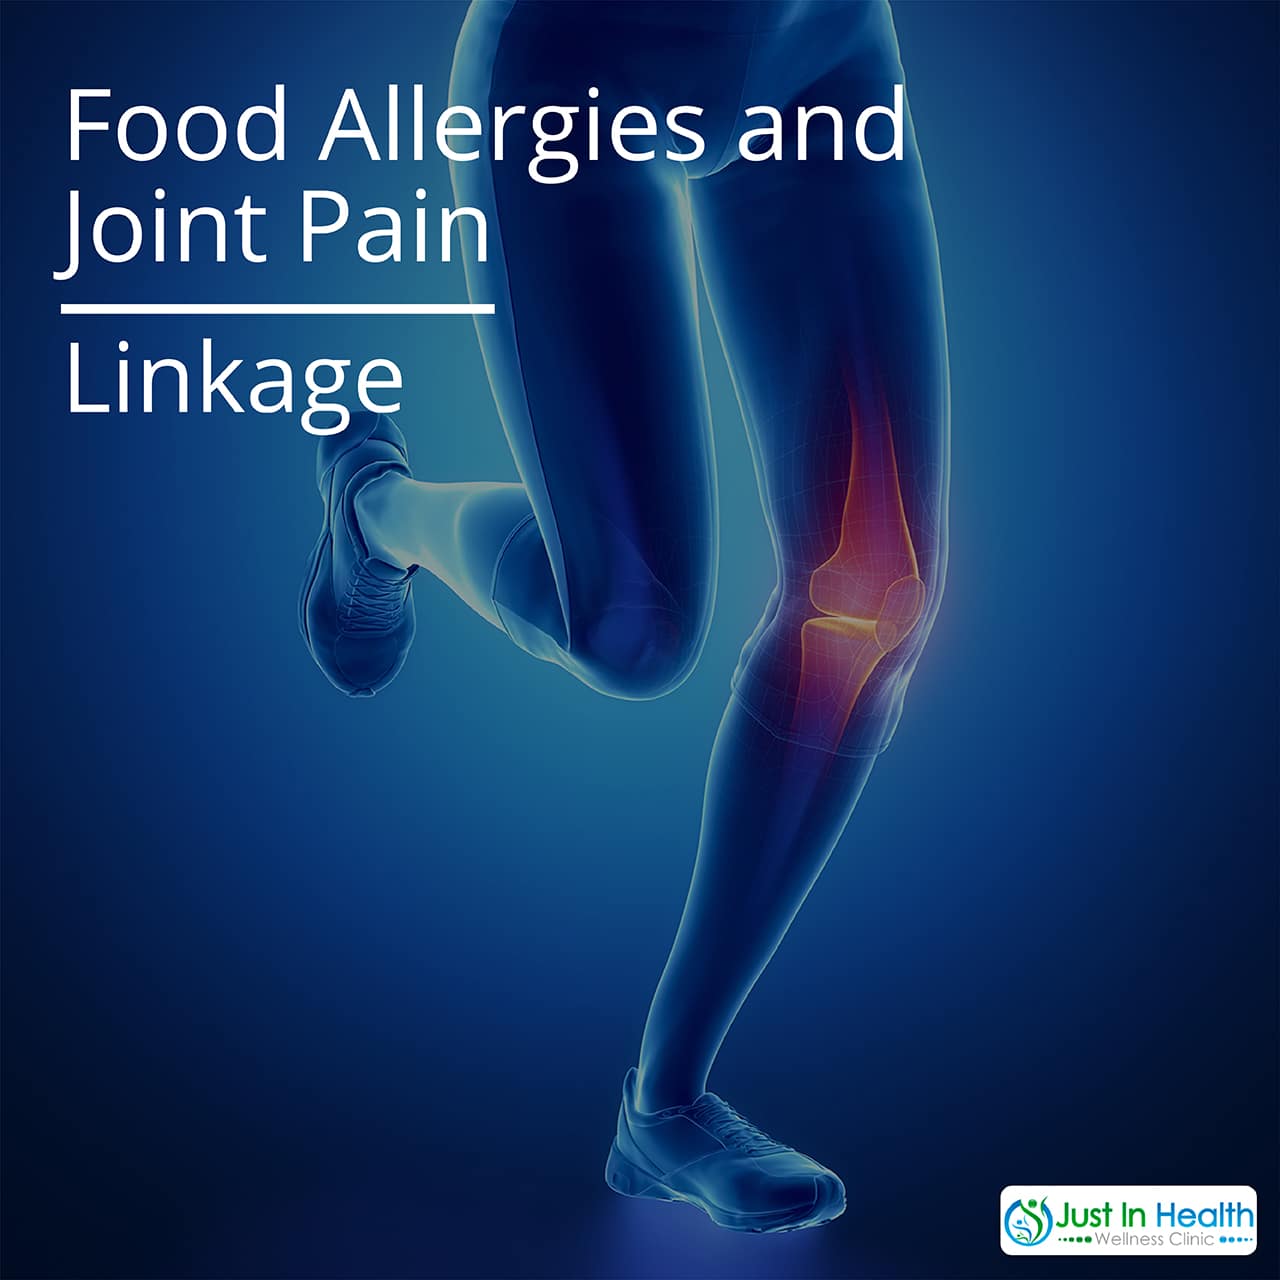 Food Allergies and Joint Pain Linkage